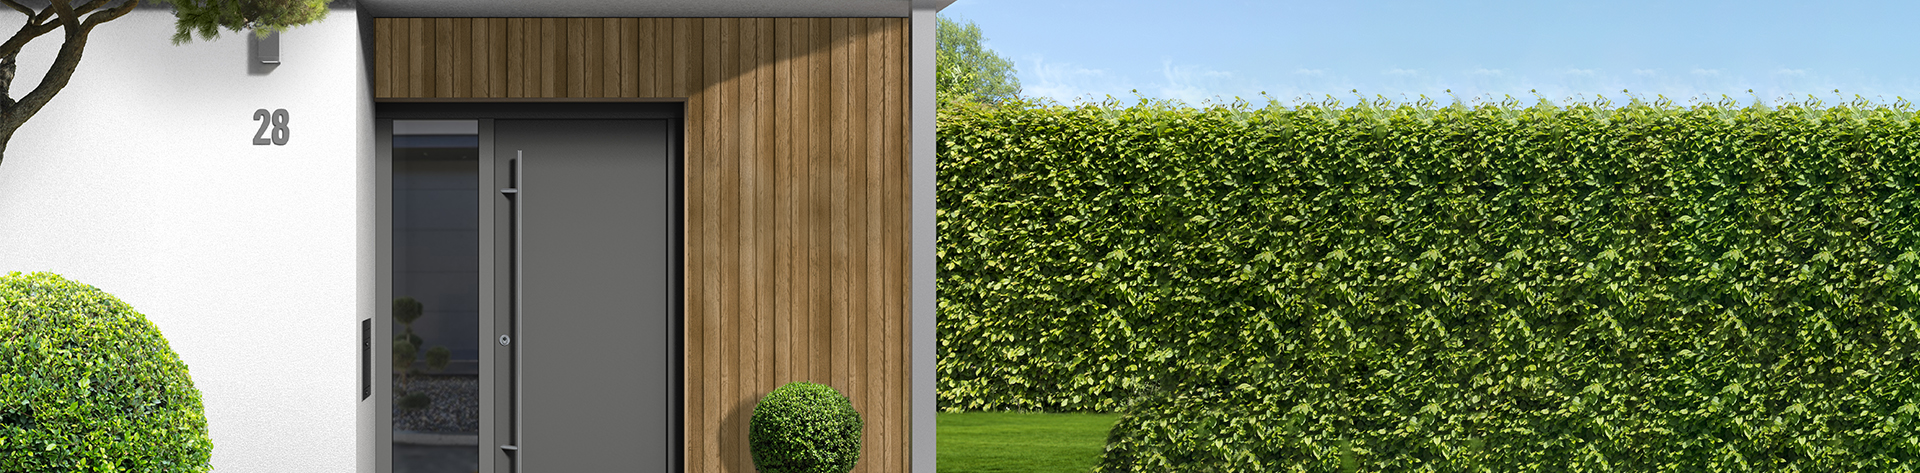 Now Stocking Millboard Wall Cladding